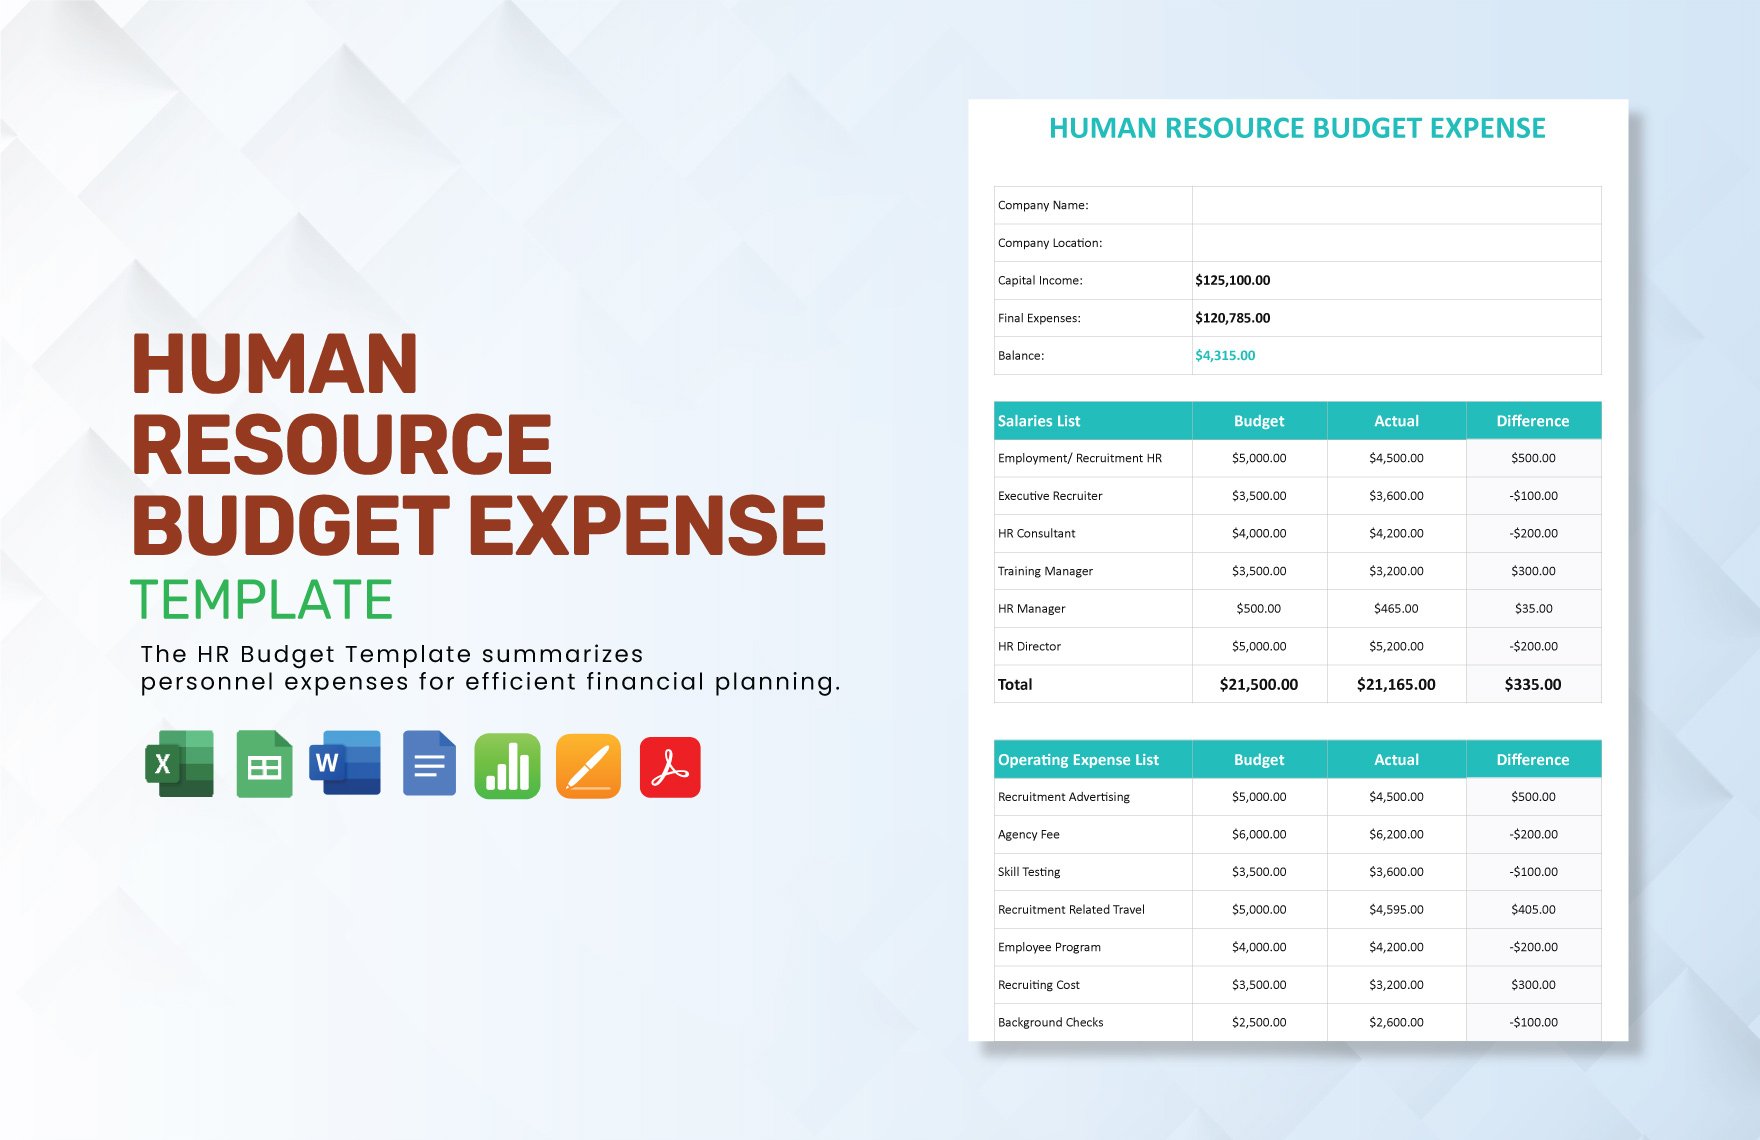 Human Resource Budget Expense Template in Word, Google Docs, Excel, PDF, Google Sheets, Apple Pages, Apple Numbers